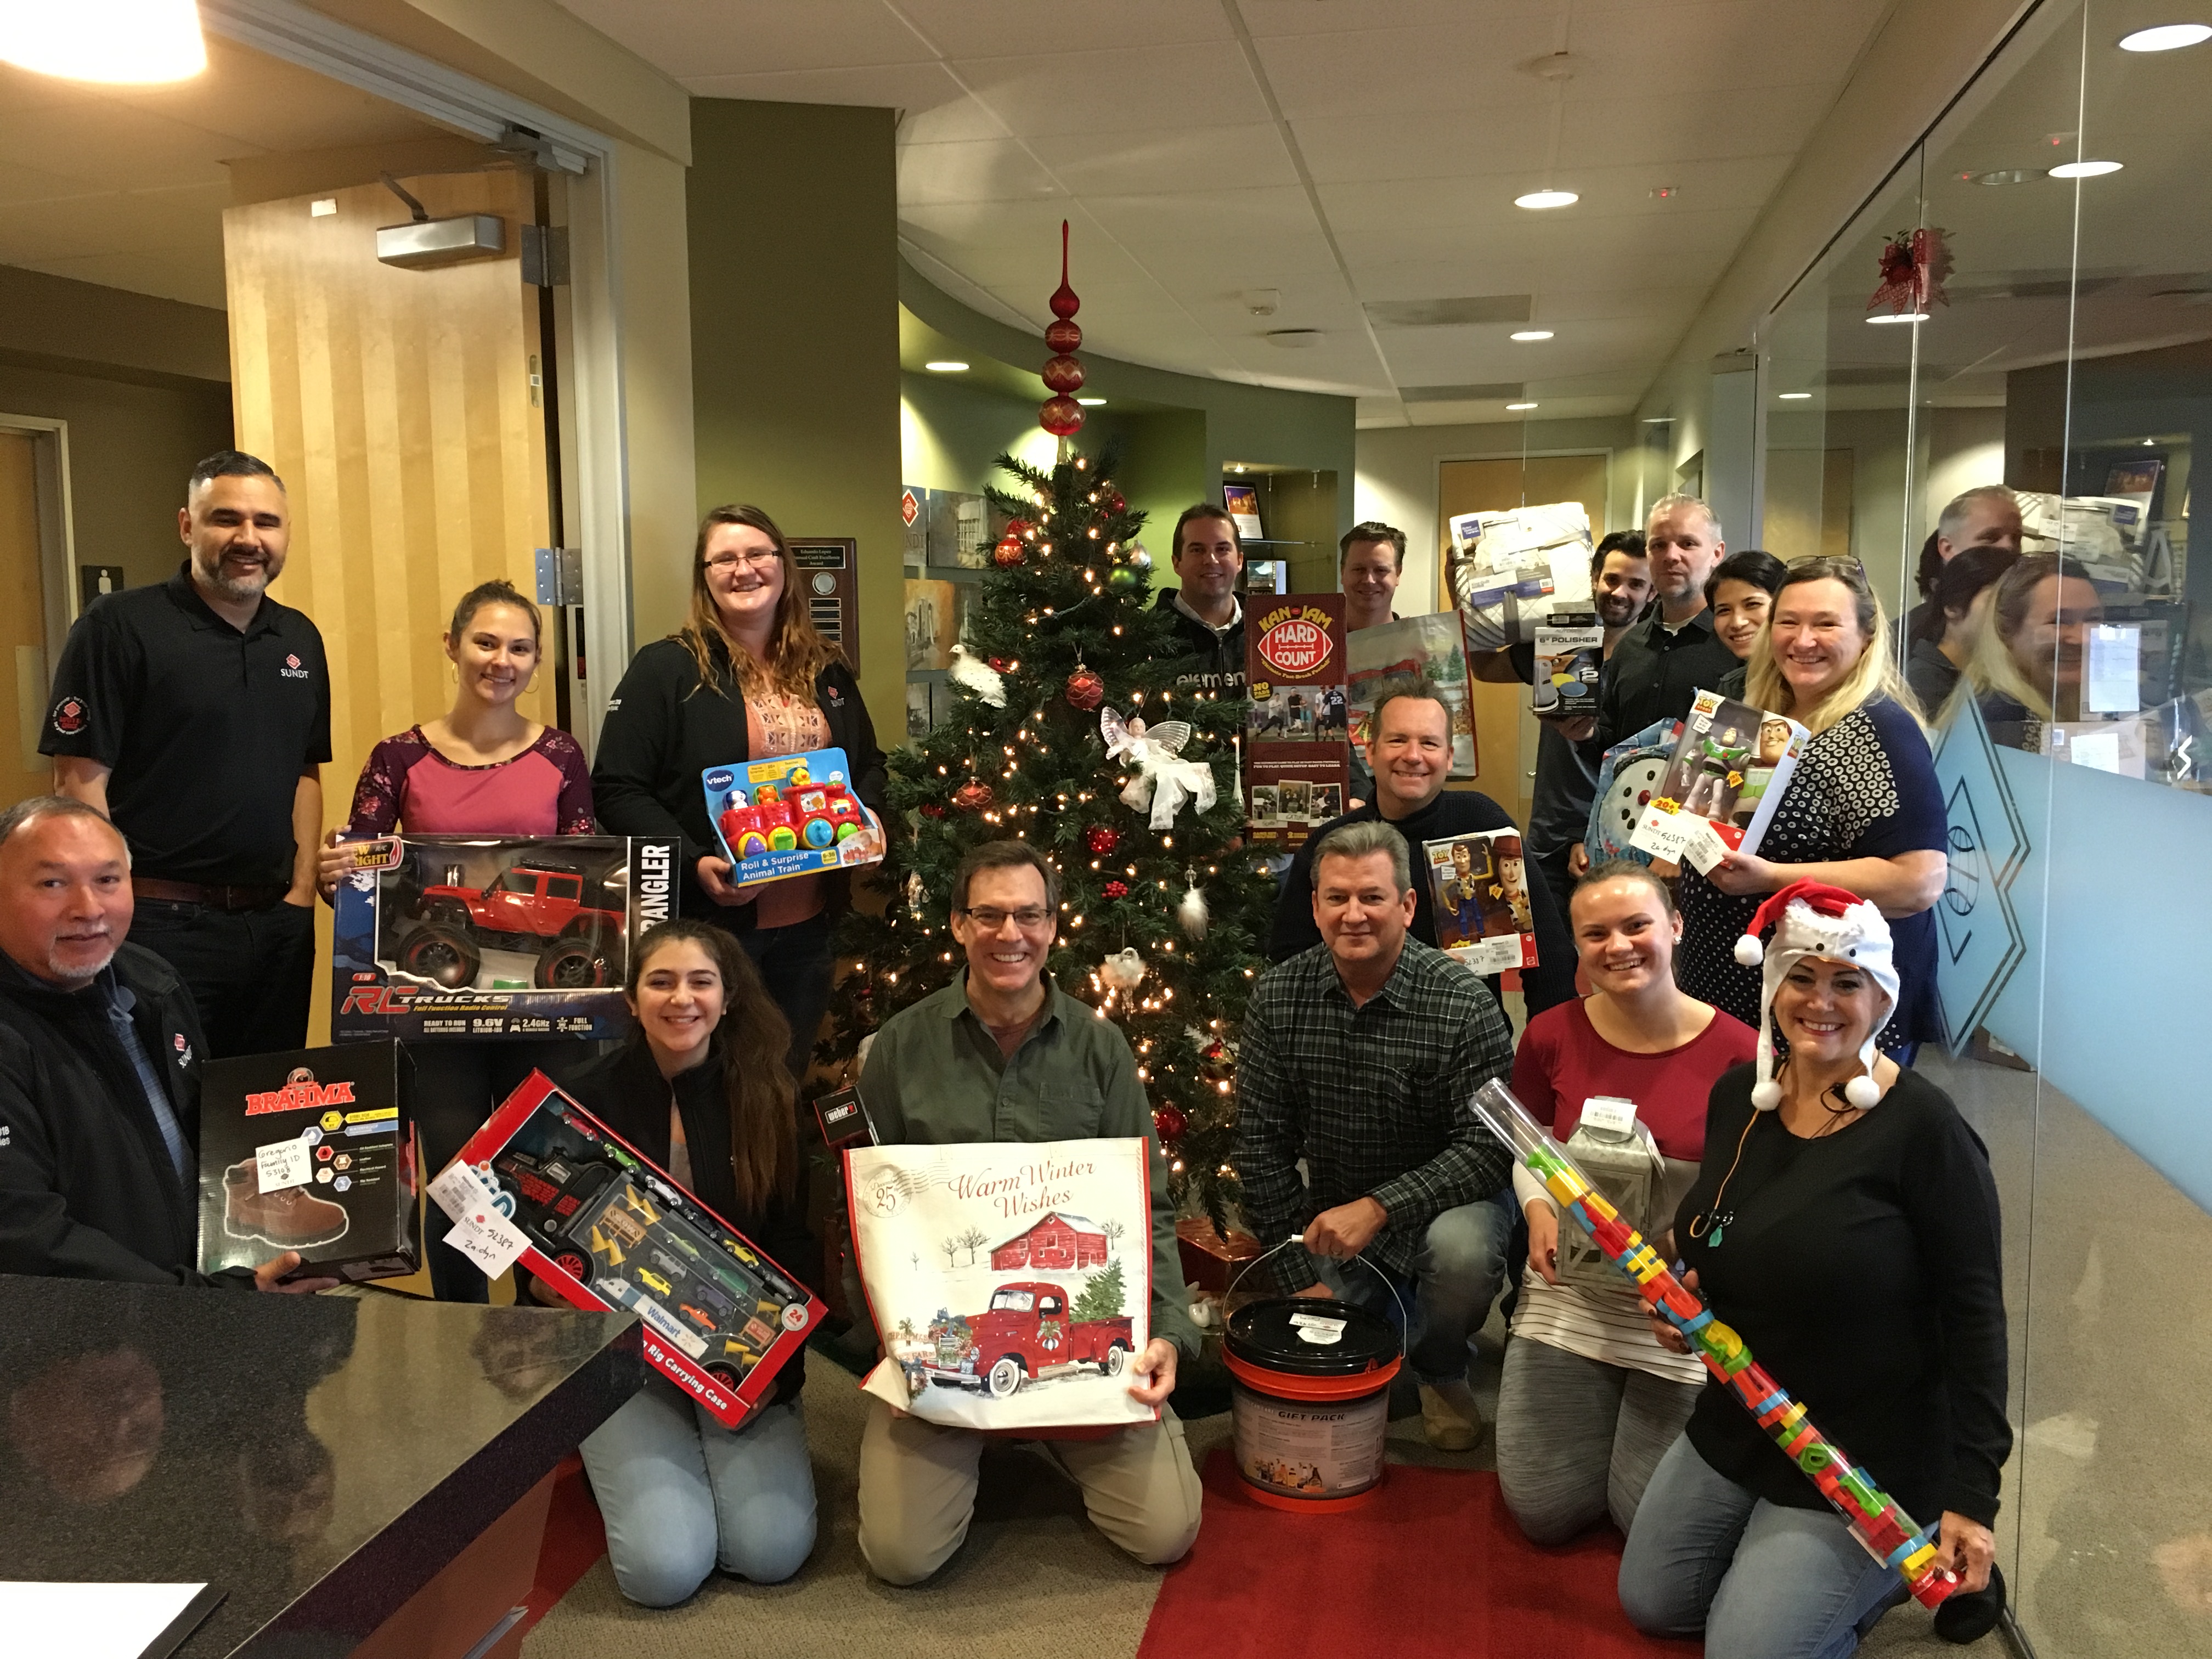 Our San Diego office partnered with Support the Enlisted Project (STEP), an organization that sponsors enlisted families in need during the holiday season, and we were able to sponsor a total of 10 families.  